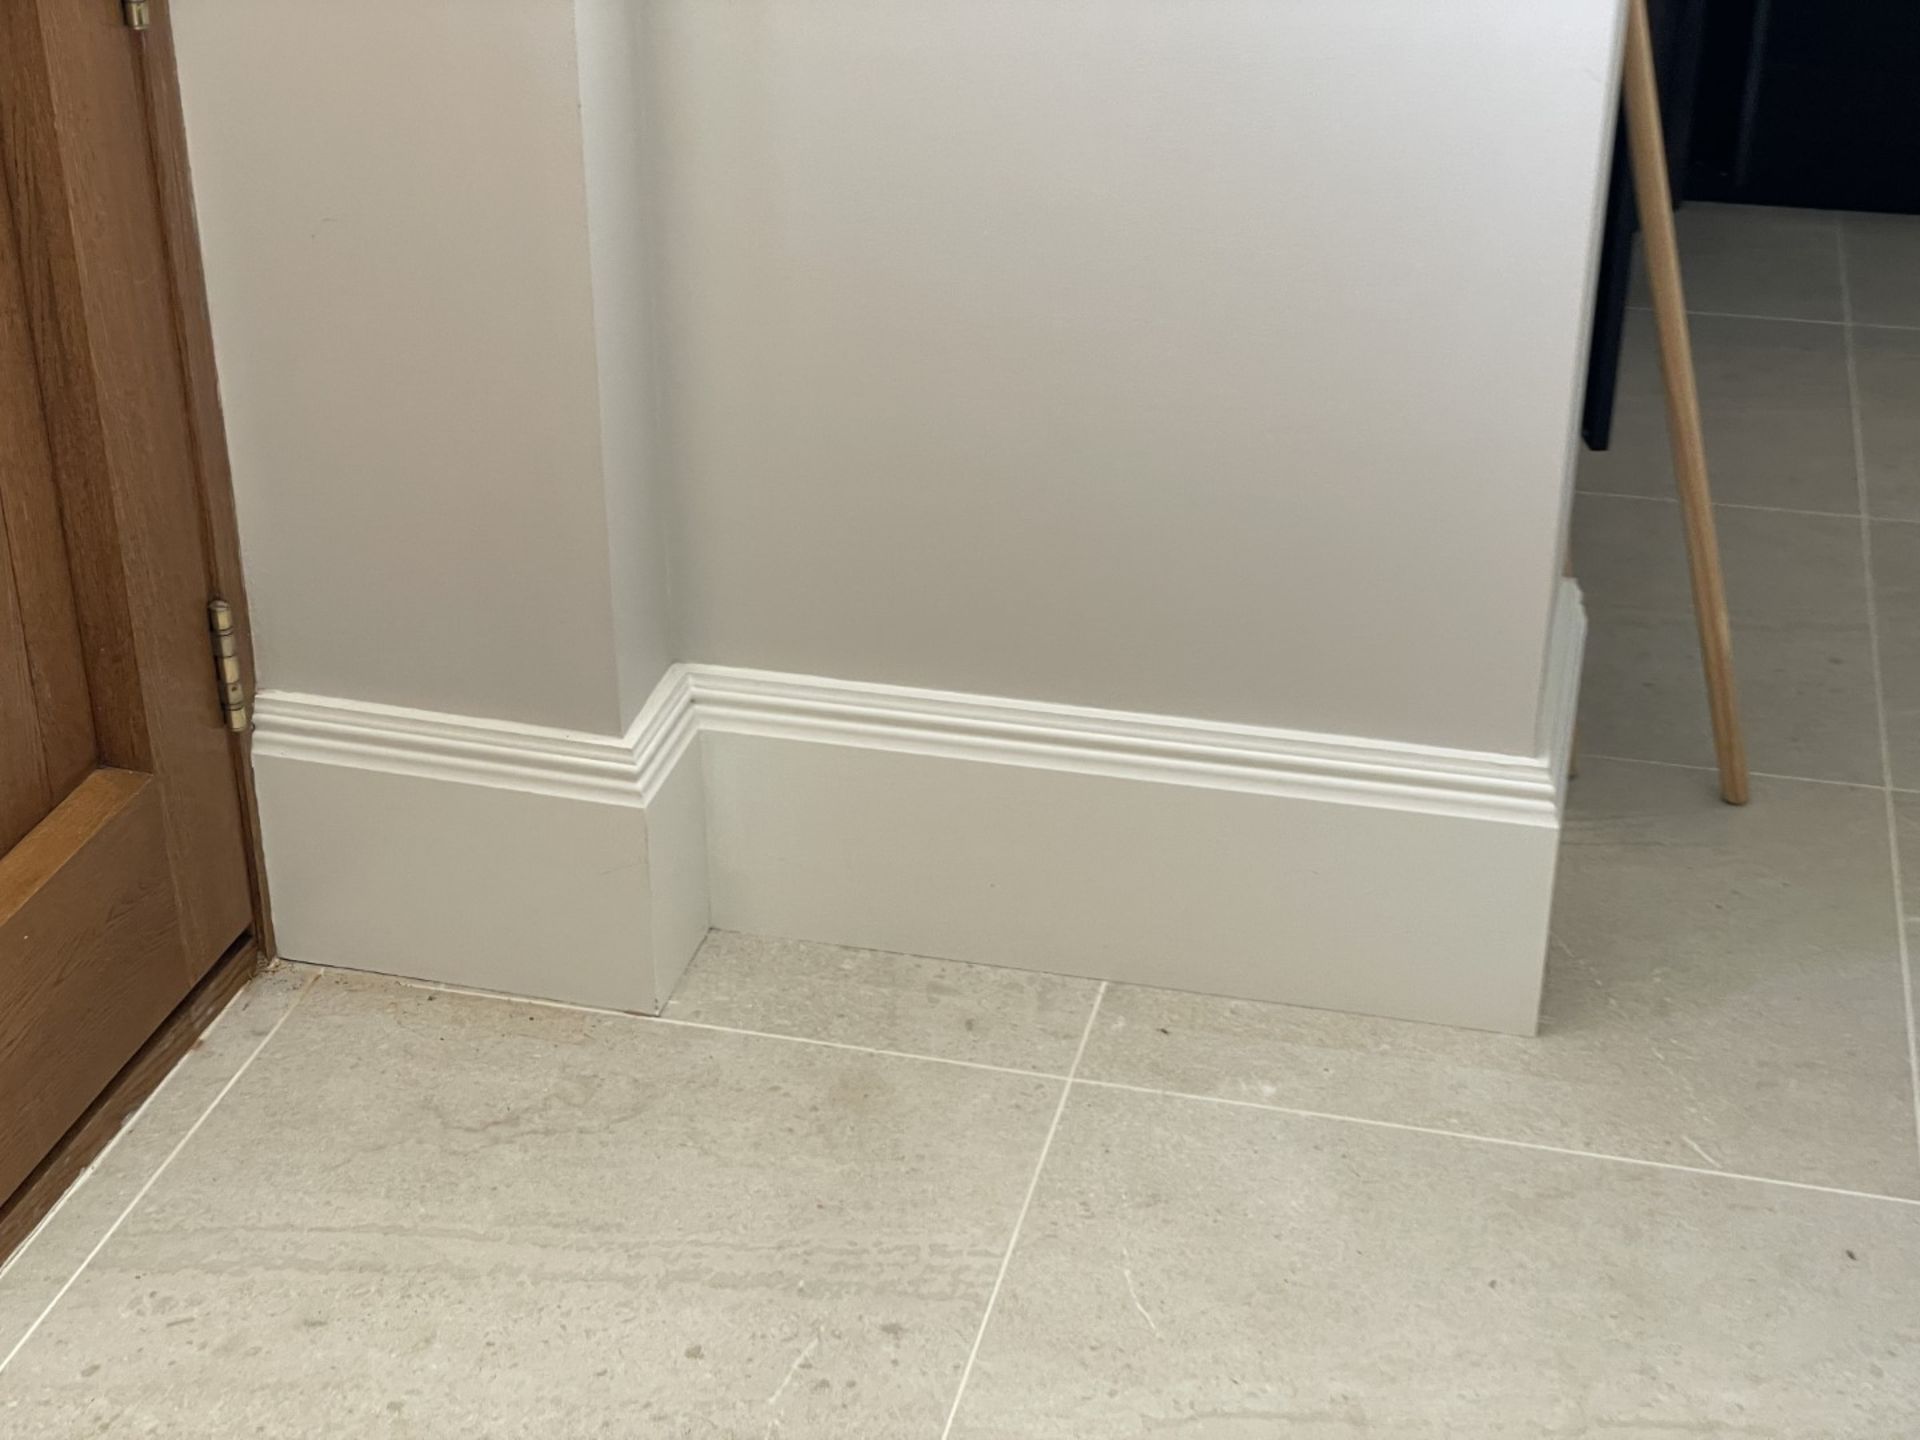 Approximately 10-Metres of Painted Timber Wooden Skirting Boards, In White - Ref: PAN210 - CL896 - - Image 3 of 9